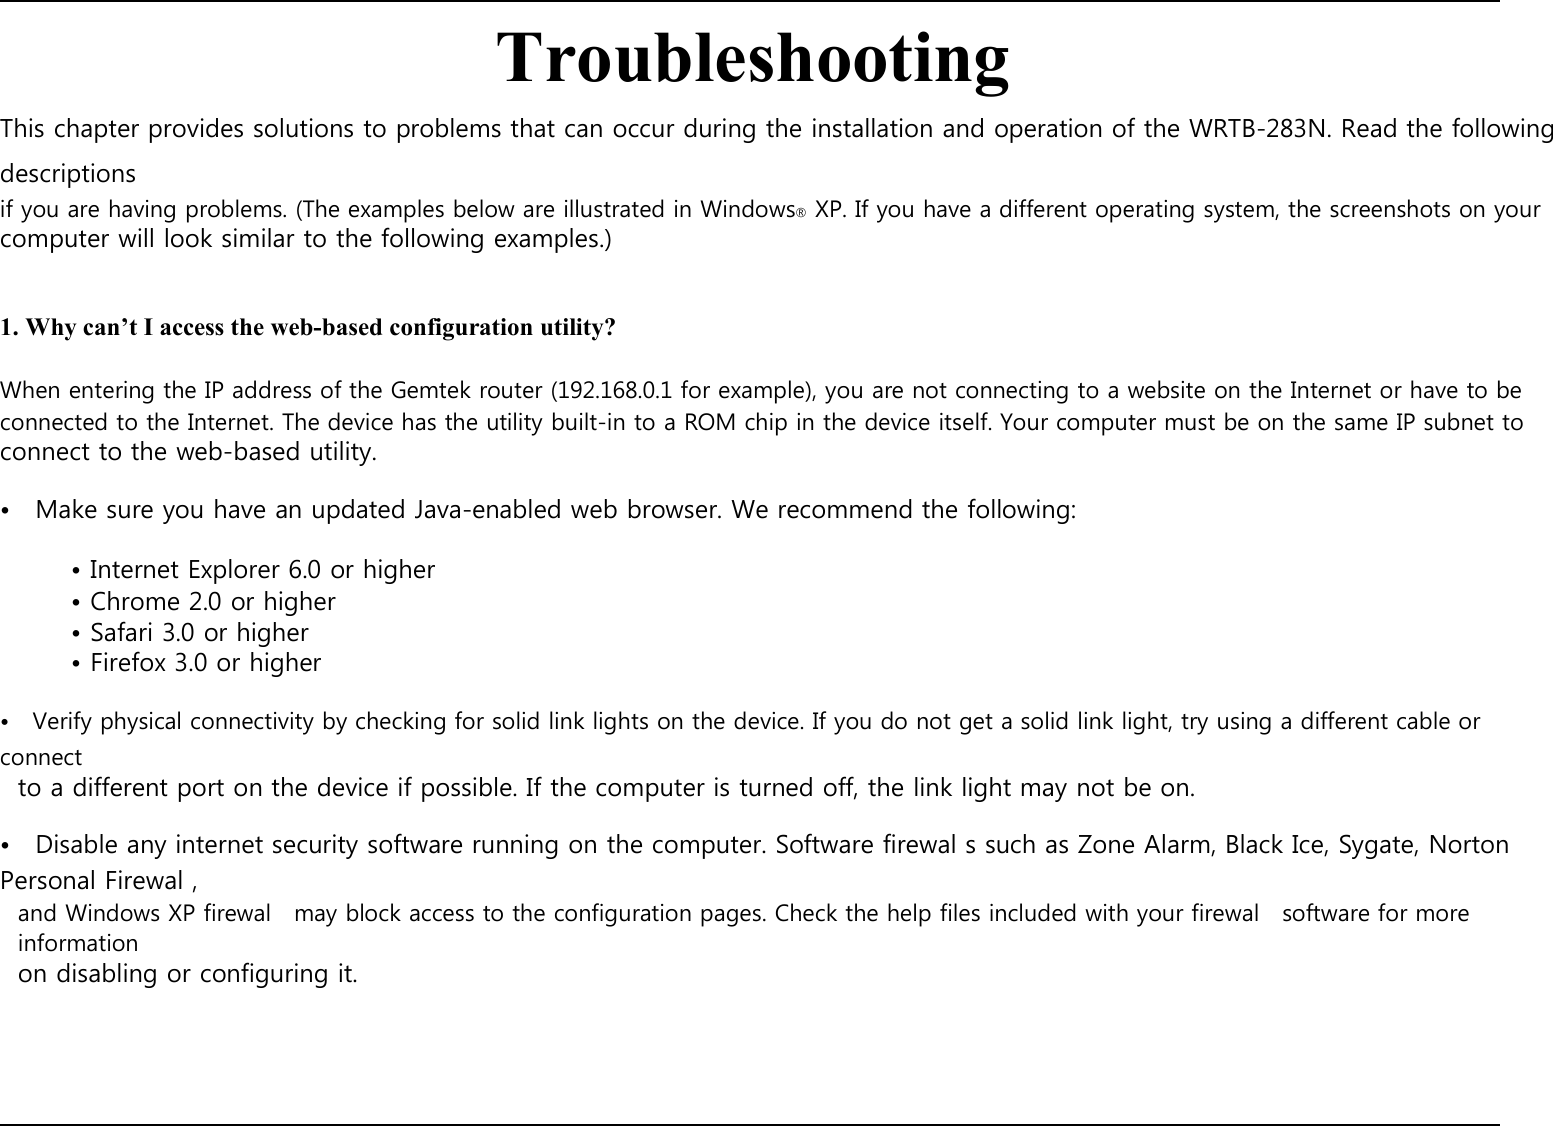    Troubleshooting This chapter provides solutions to problems that can occur during the installation and operation of the WRTB-283N. Read the following descriptions if you are having problems. (The examples below are illustrated in Windows® XP. If you have a different operating system, the screenshots on your computer will look similar to the following examples.)   1. Why can’t I access the web-based configuration utility?  When entering the IP address of the Gemtek router (192.168.0.1 for example), you are not connecting to a website on the Internet or have to be connected to the Internet. The device has the utility built-in to a ROM chip in the device itself. Your computer must be on the same IP subnet to connect to the web-based utility.  •    Make sure you have an updated Java-enabled web browser. We recommend the following:  • Internet Explorer 6.0 or higher • Chrome 2.0 or higher • Safari 3.0 or higher • Firefox 3.0 or higher  •    Verify physical connectivity by checking for solid link lights on the device. If you do not get a solid link light, try using a different cable or connect to a different port on the device if possible. If the computer is turned off, the link light may not be on.  •    Disable any internet security software running on the computer. Software firewal s such as Zone Alarm, Black Ice, Sygate, Norton Personal Firewal , and Windows XP firewal    may block access to the configuration pages. Check the help files included with your firewal    software for more information on disabling or configuring it.               